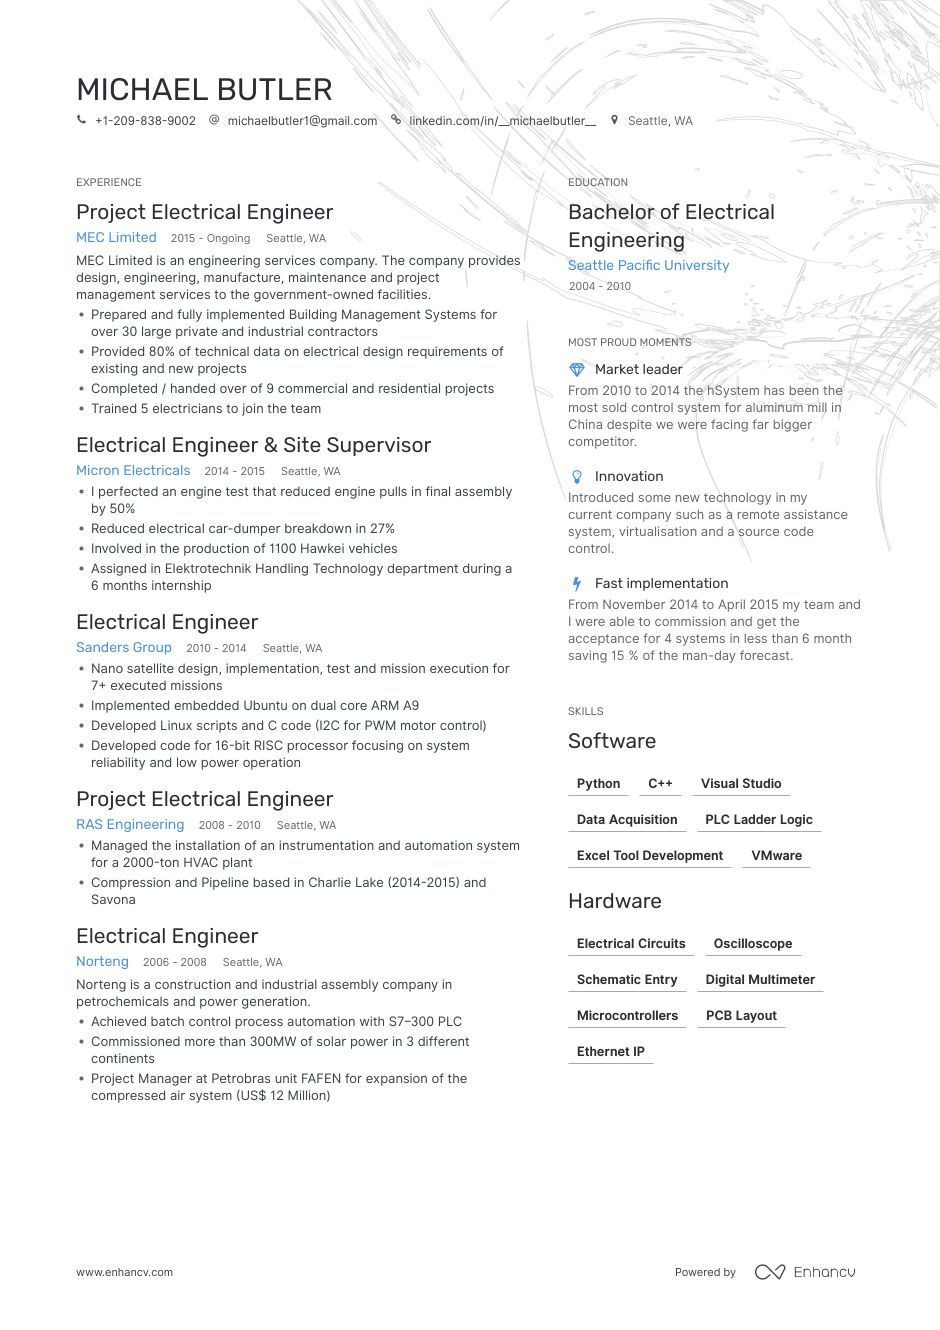 Resume Sample for Entry Level Electrical Engineer 13 Electrical Engineering Resume Example & Guide for 2019 Resume …